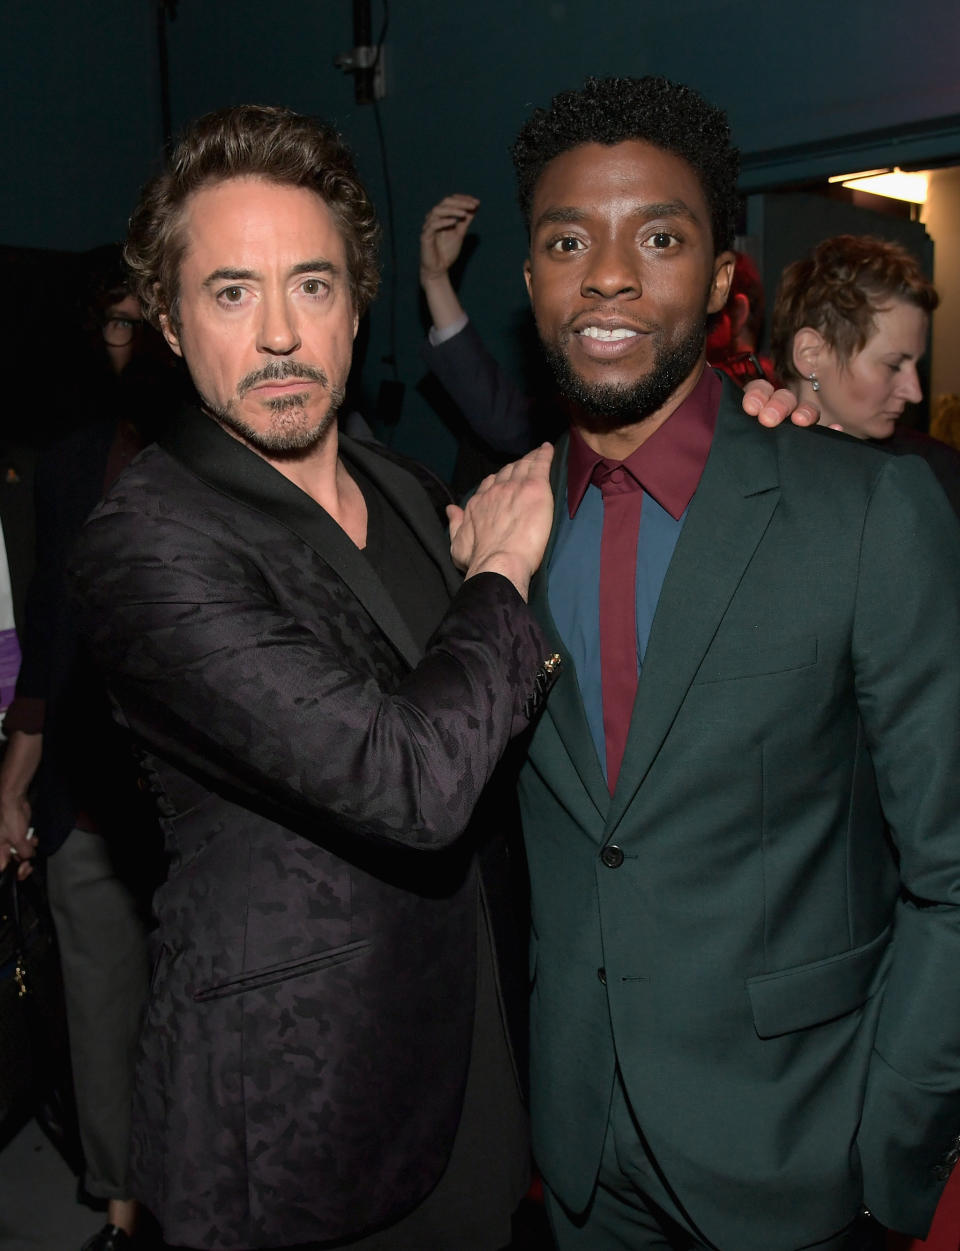 <p>People couldn’t get enough of <em>Black Panther</em>, so they’ll enjoy their fix in this film too. Boseman brings his superhero back to the big screen — and hung with Downey on the carpet. (Photo: Charley Gallay/Getty Images for Disney) </p>